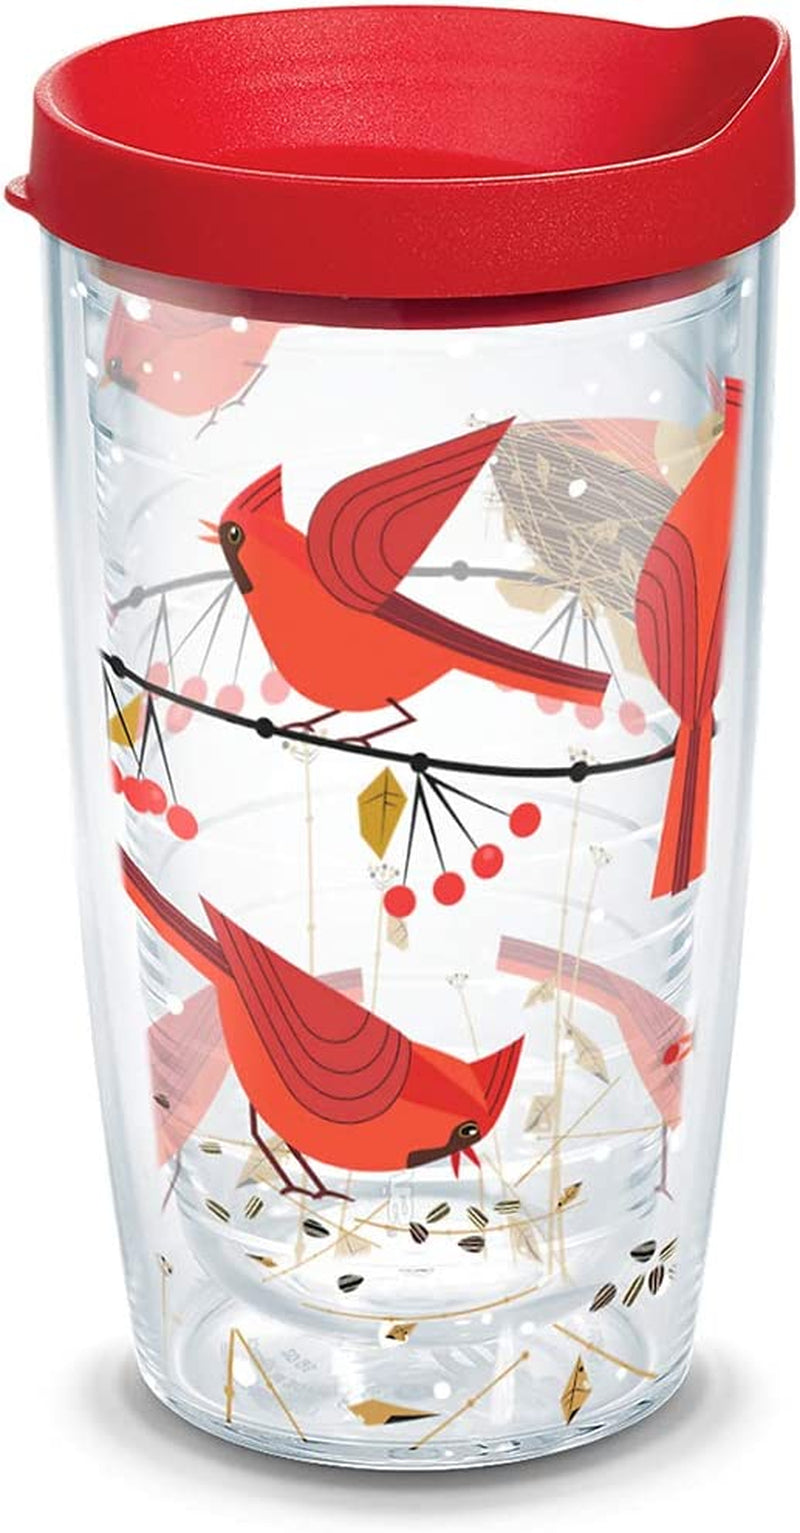 Tervis Made in USA Double Walled Festive Holiday Season Cardinals Insulated Tumbler Cup Keeps Drinks Cold & Hot, 16Oz Mug, Classic Home & Garden > Kitchen & Dining > Tableware > Drinkware Tervis Classic 16oz 